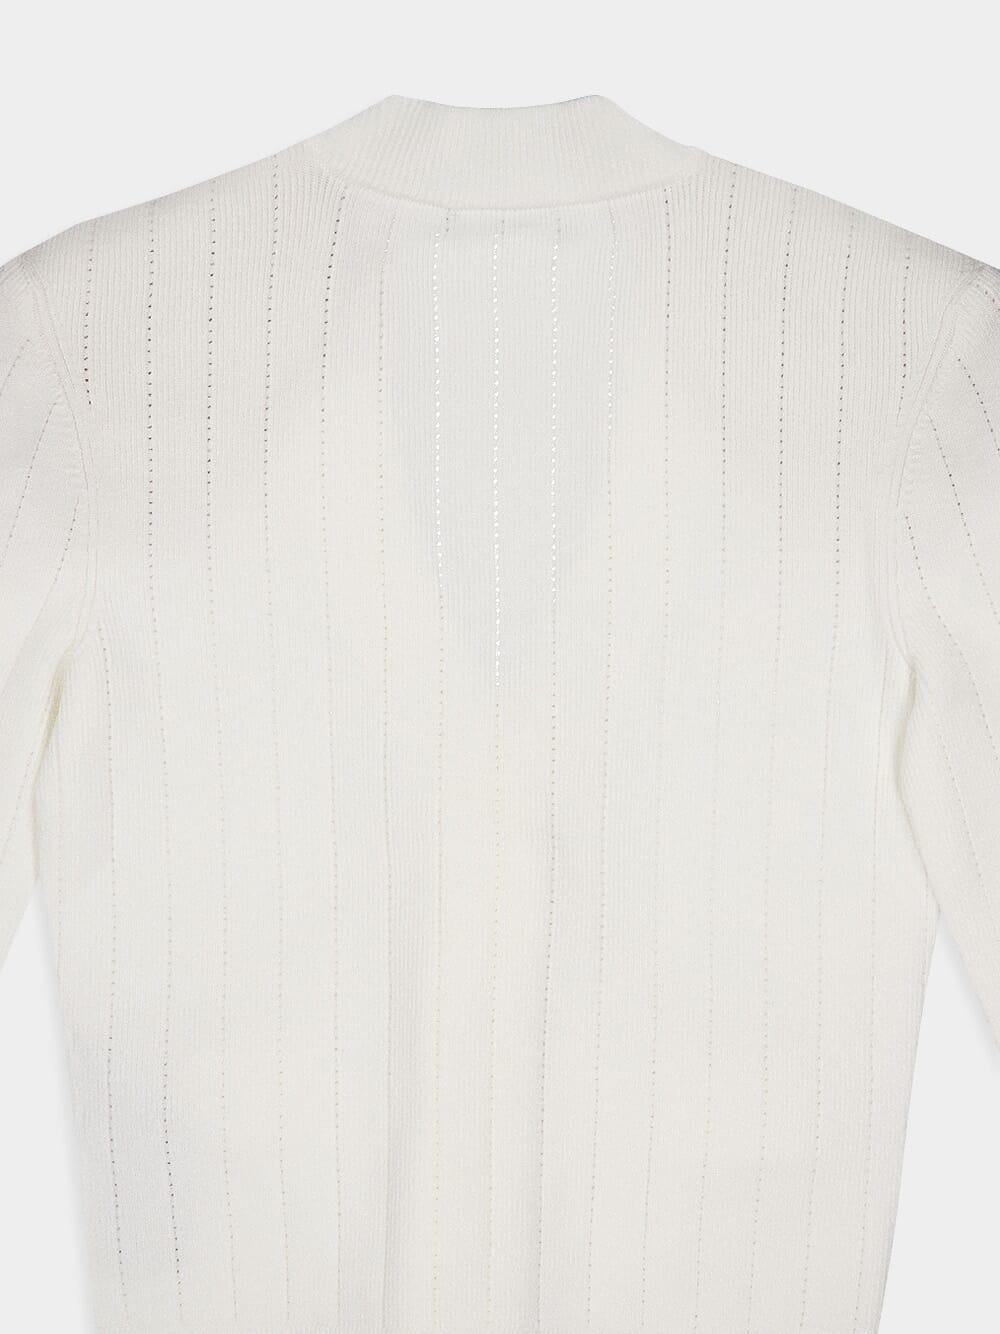 BalmainRibbed Knit Buttoned Cardigan at Fashion Clinic